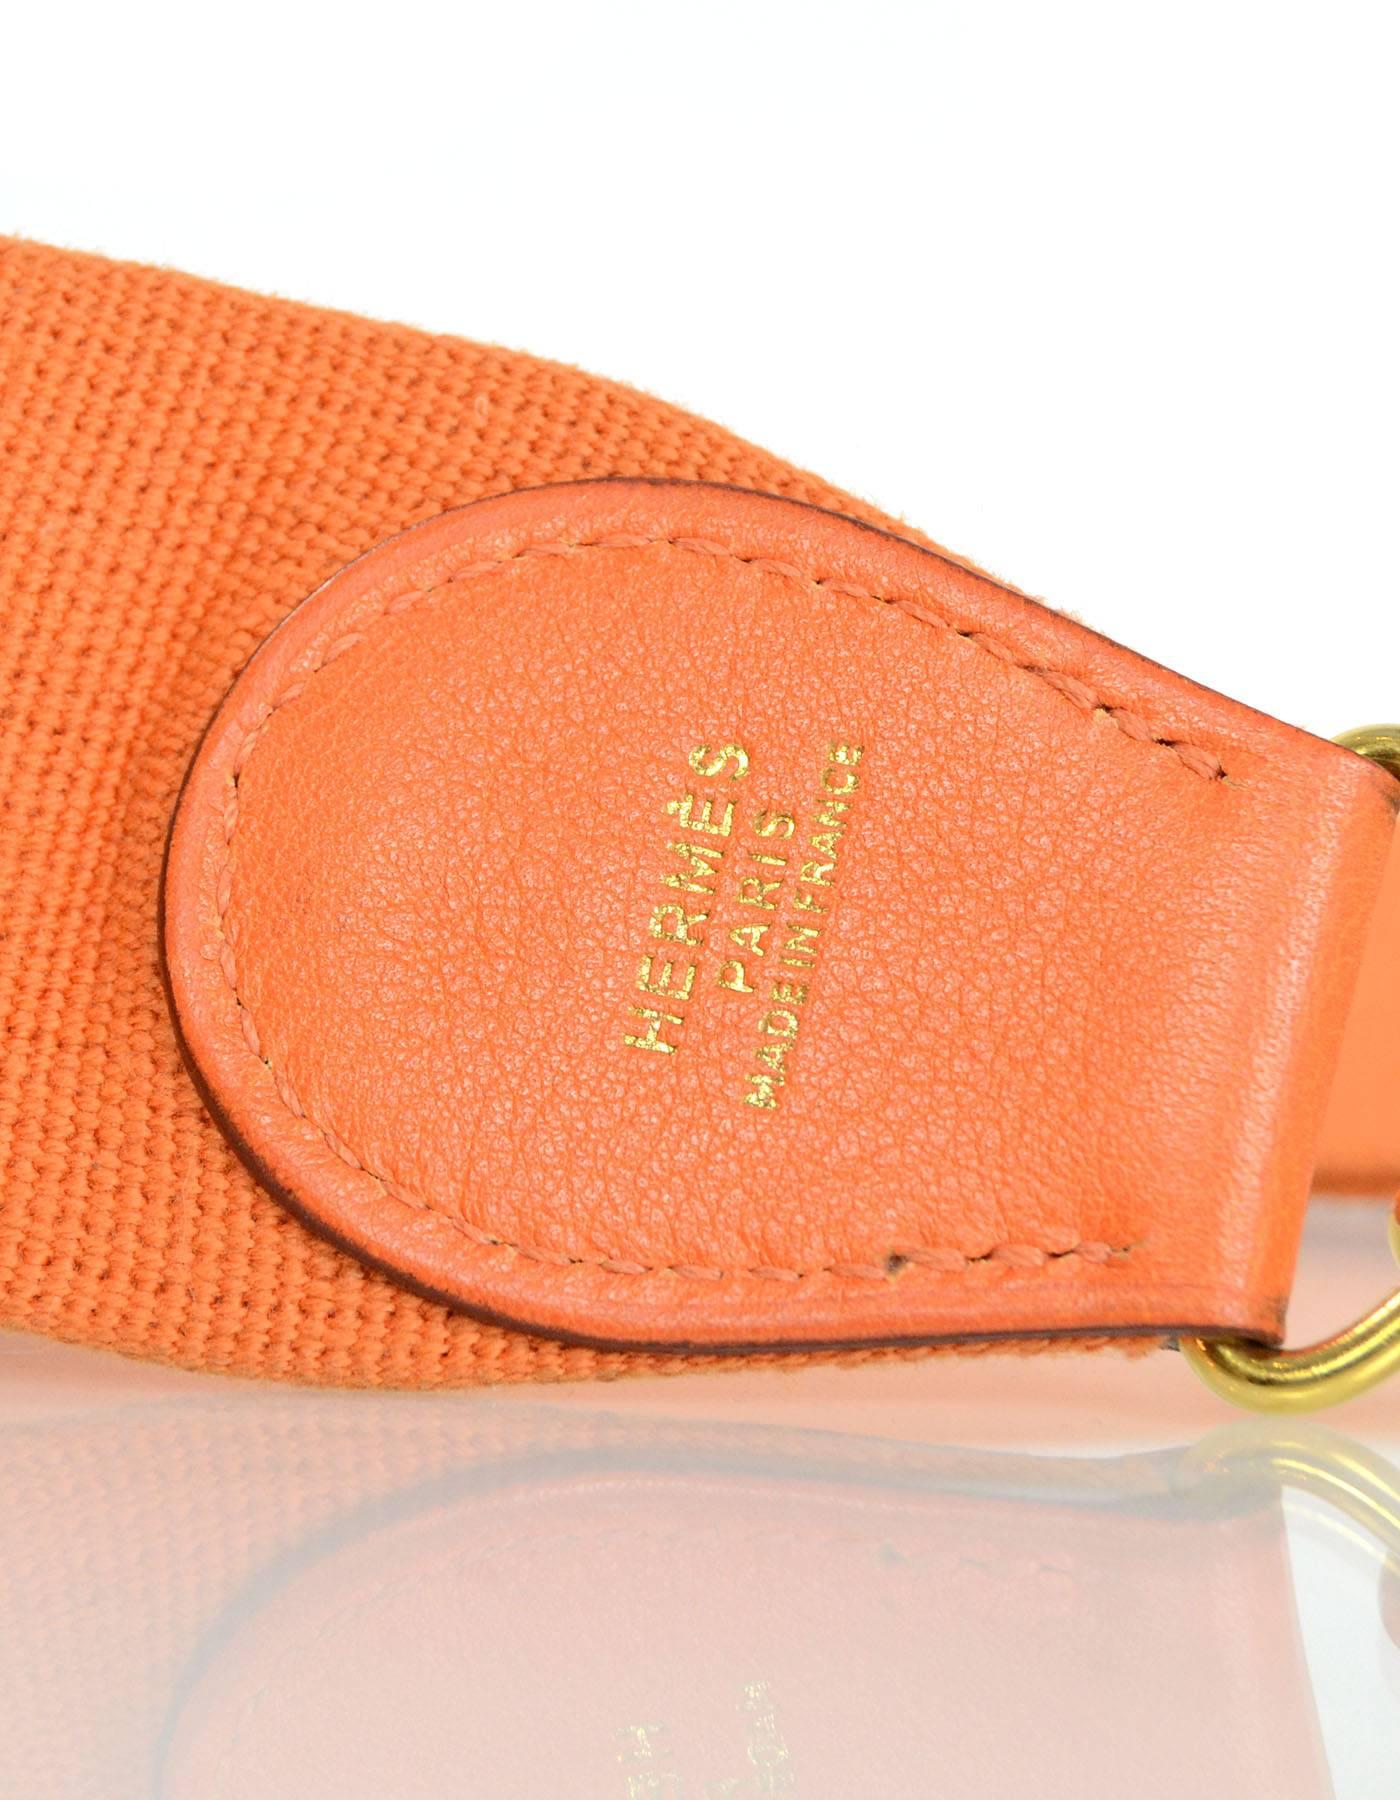 Hermes Orange Canvas & Leather Bag Strap 

Made In: France
Color: Orange
Materials: Leather and canvas
Closure/Opening: Two swivel hook closures on either side
Stamp: HS40 (on inside of hardware)
Overall Condition: Excellent pre-owned